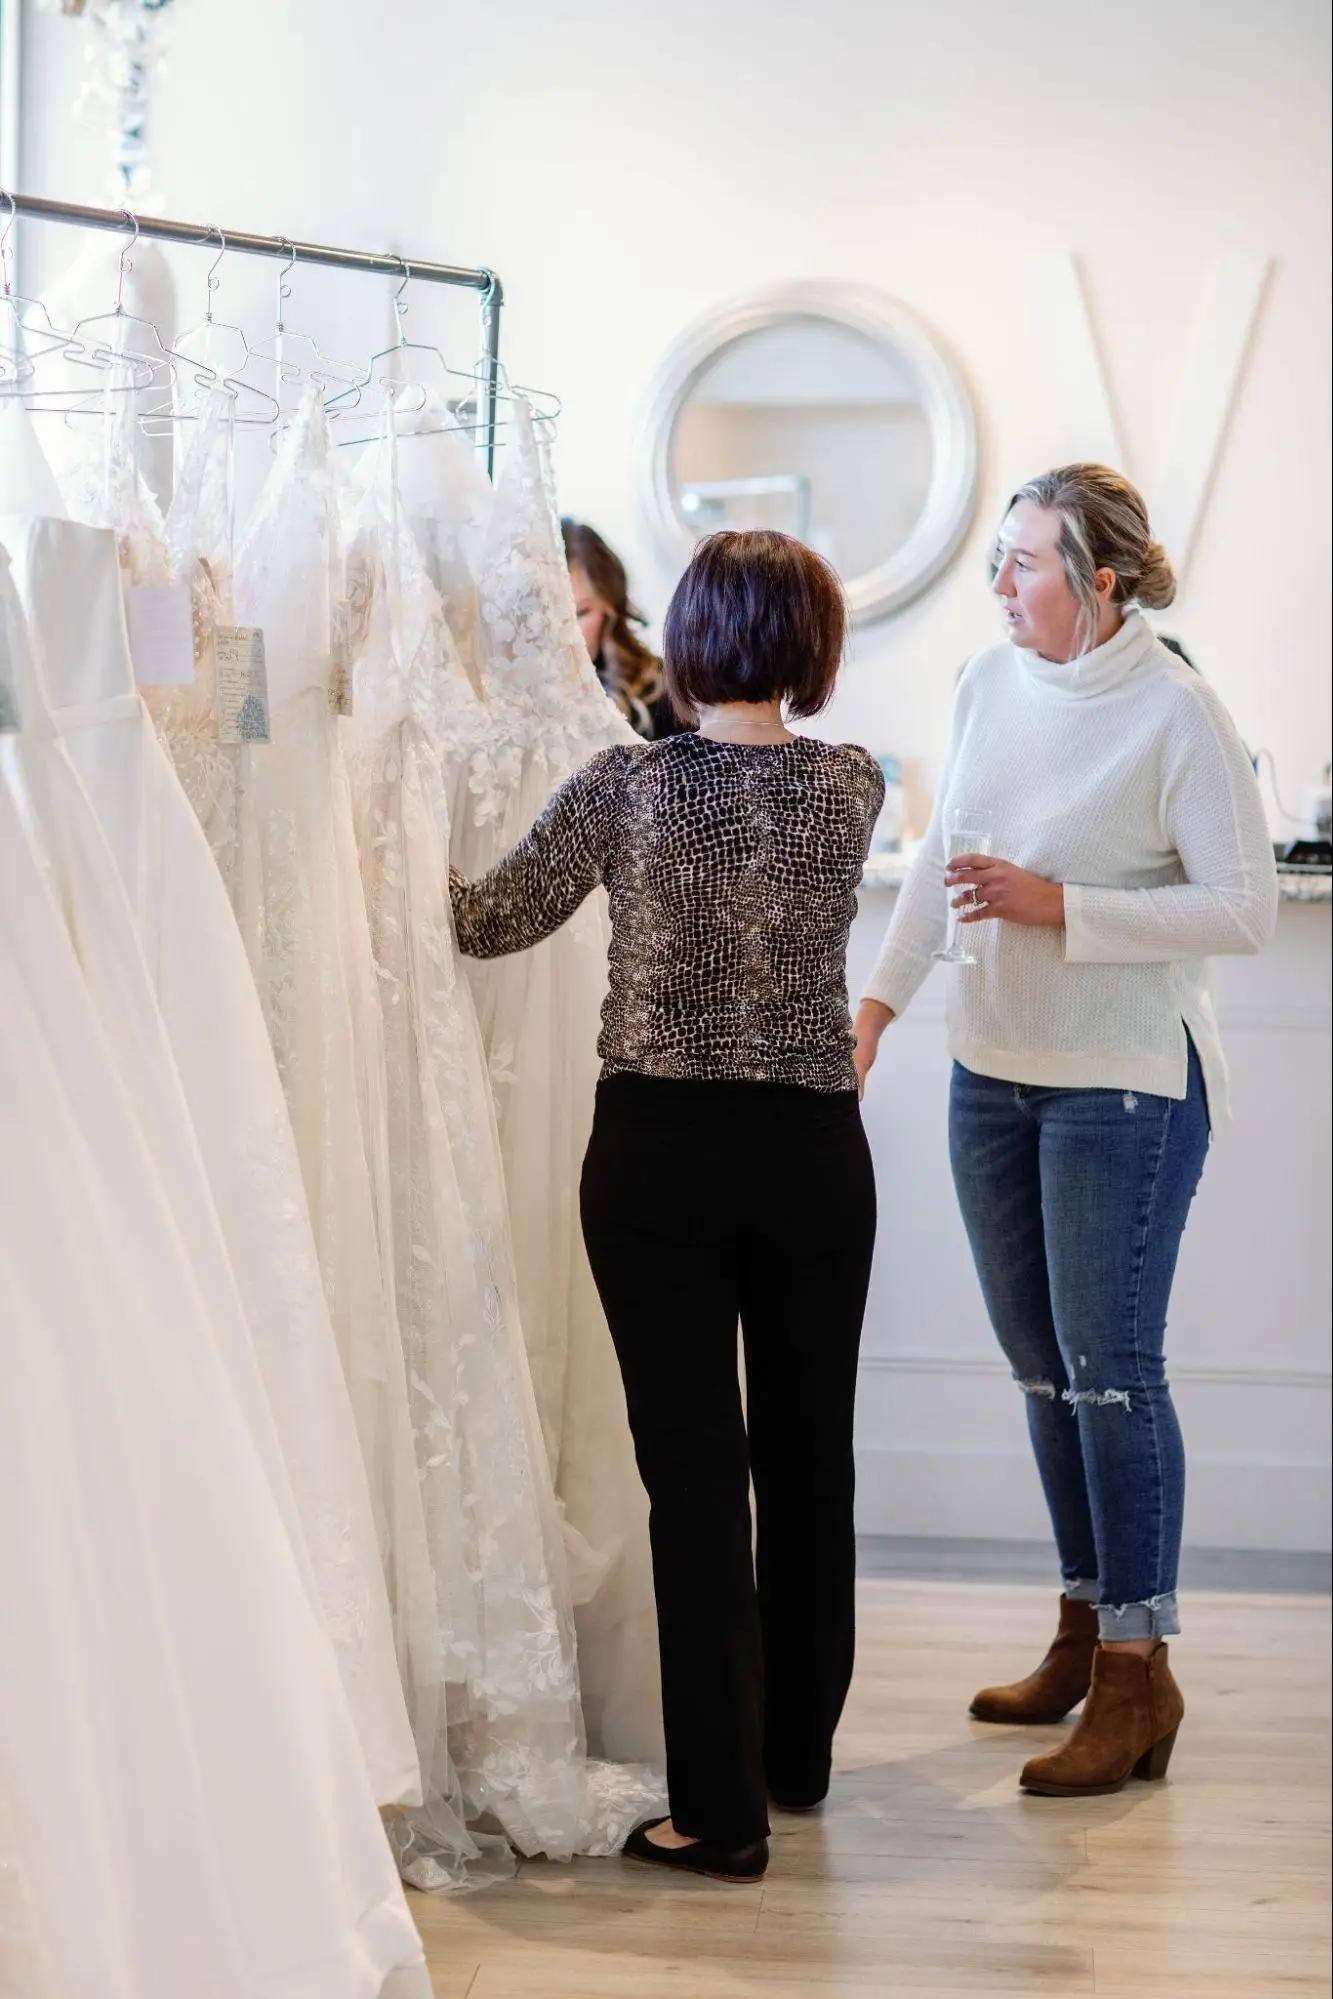 Belle Amour bride assisting bride in search of her wedding dress